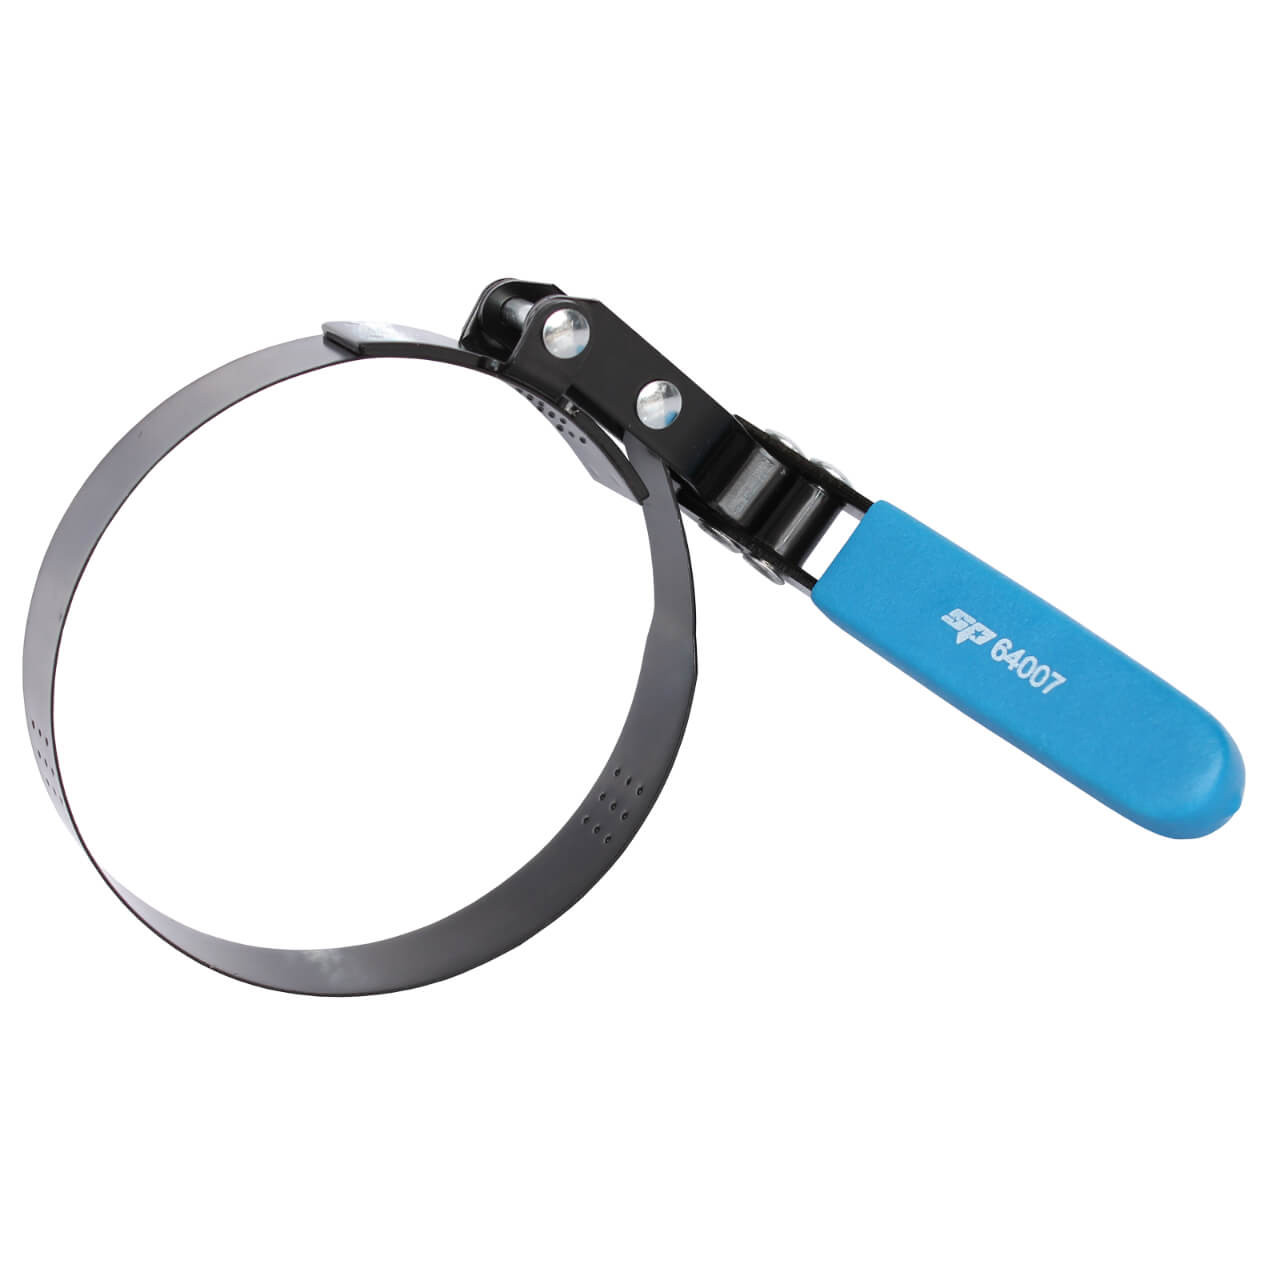 SP Tools 110-125mm Swivel Handle Oil Filter Wrench